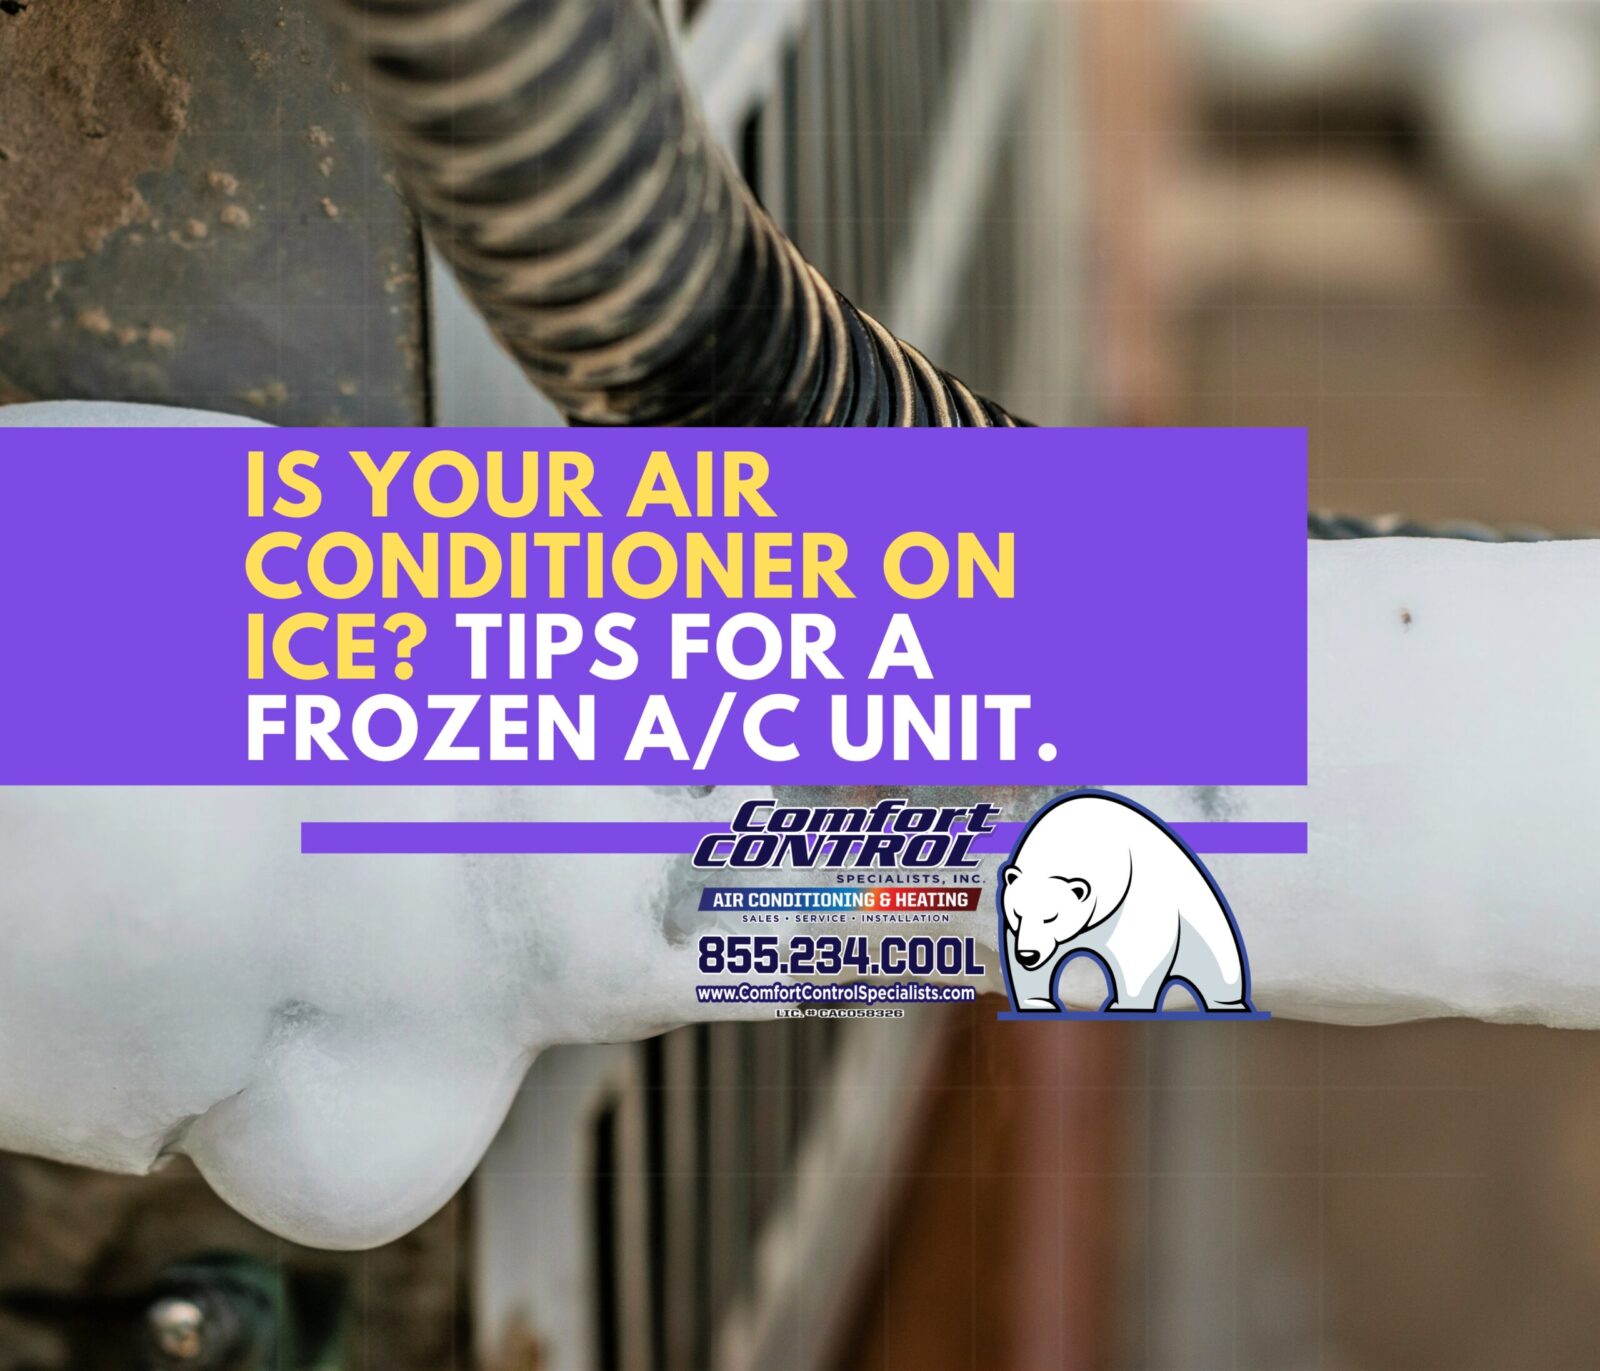 Is Your Air Conditioner on Ice? Tips for a Frozen AC Unit